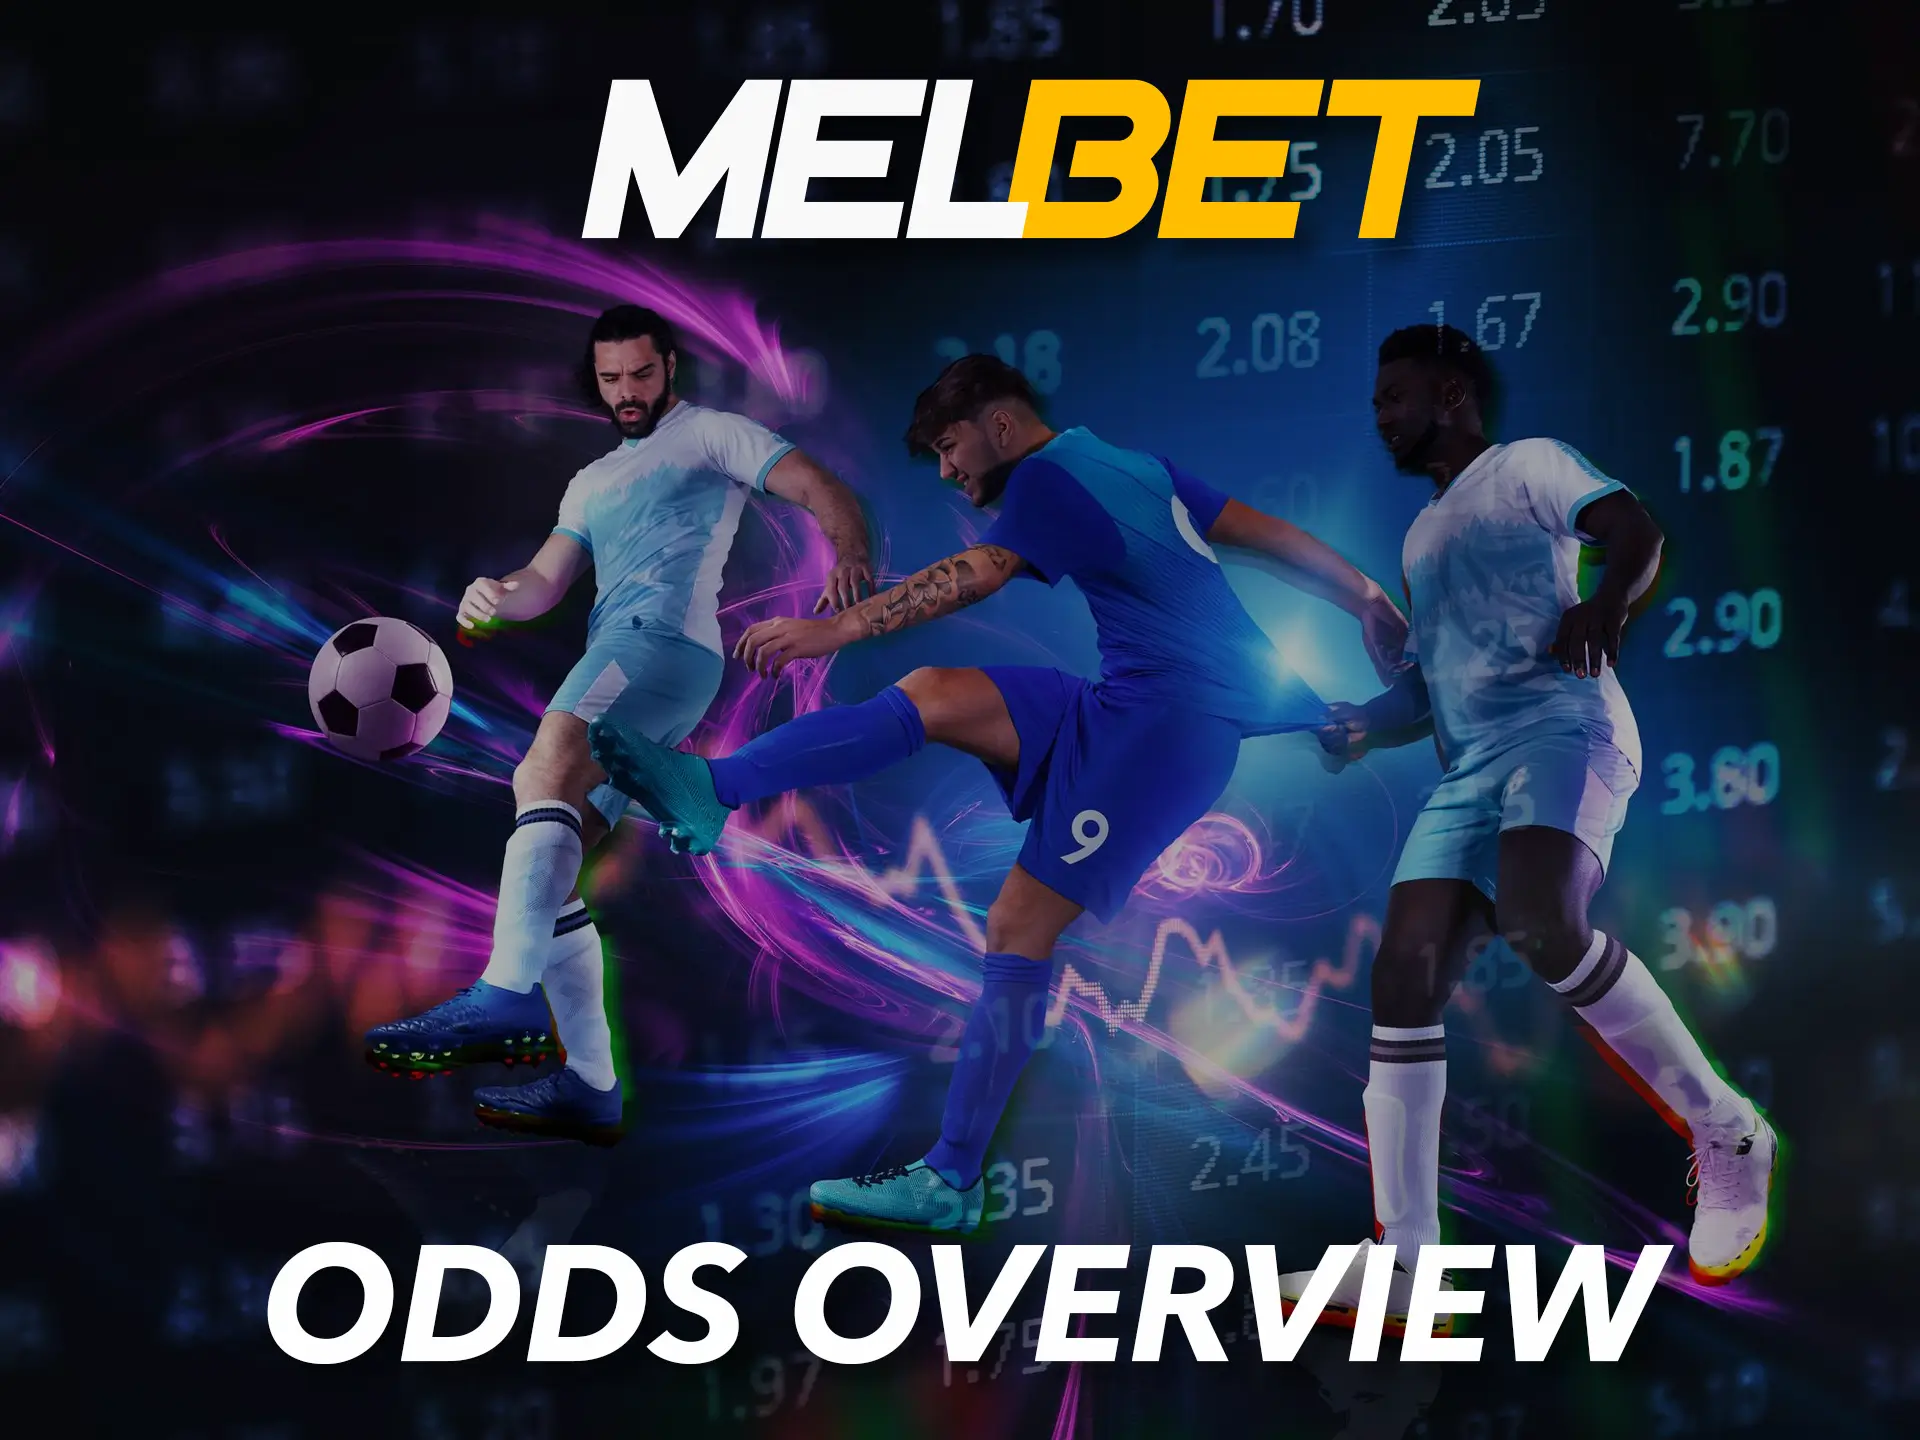 Melbet has earned the trust of its customers thanks to its high odds and variety of sports disciplines.